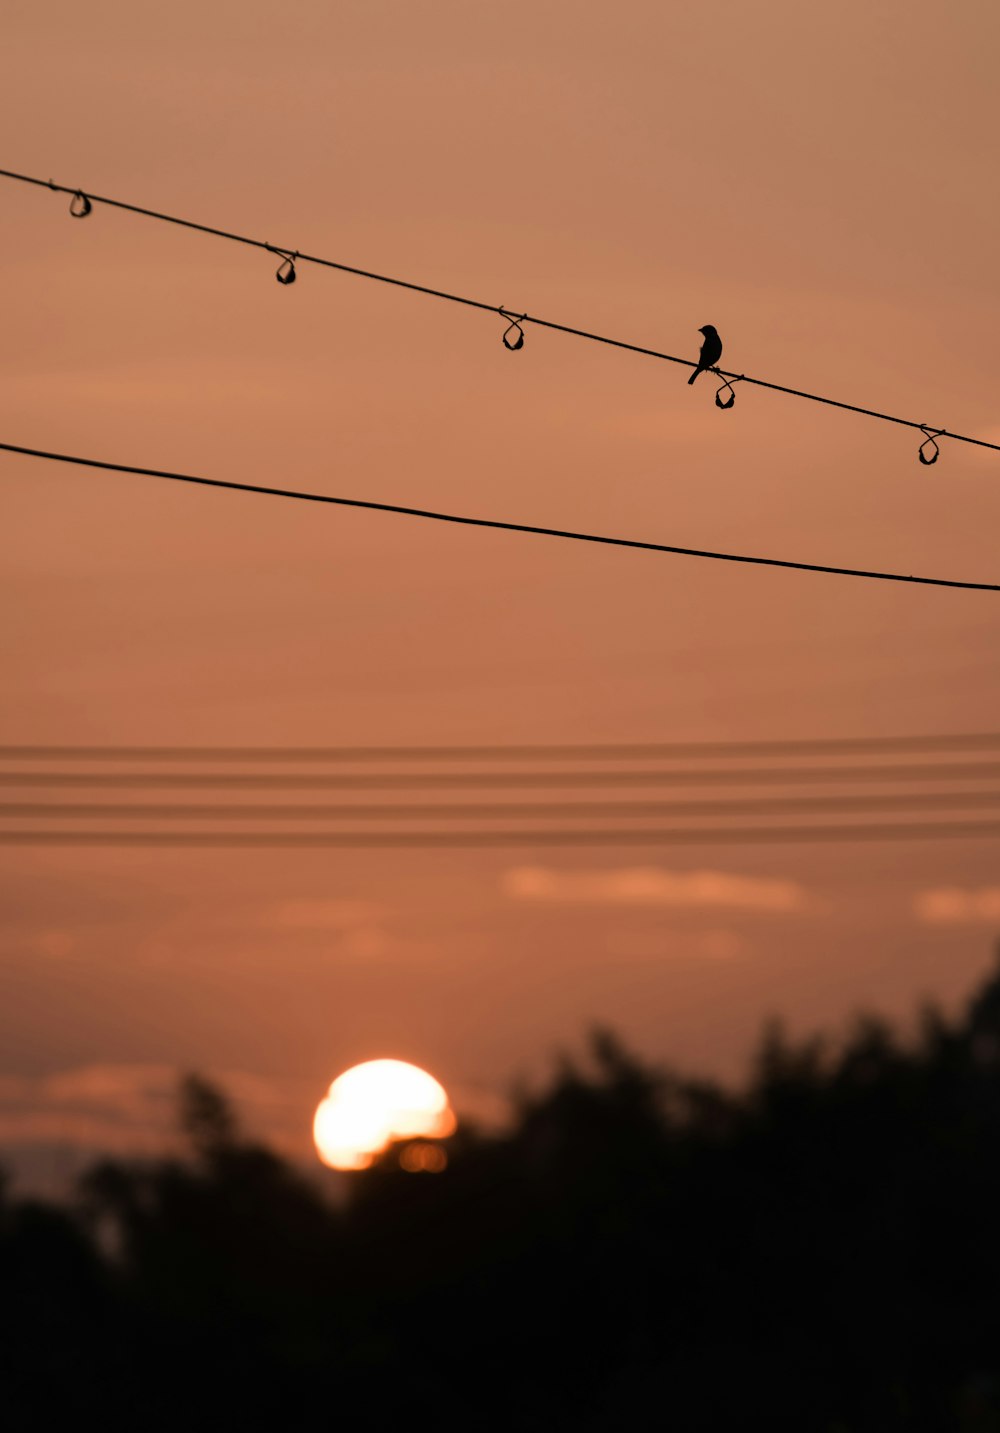 silhouette of bird porches on wire during sunset